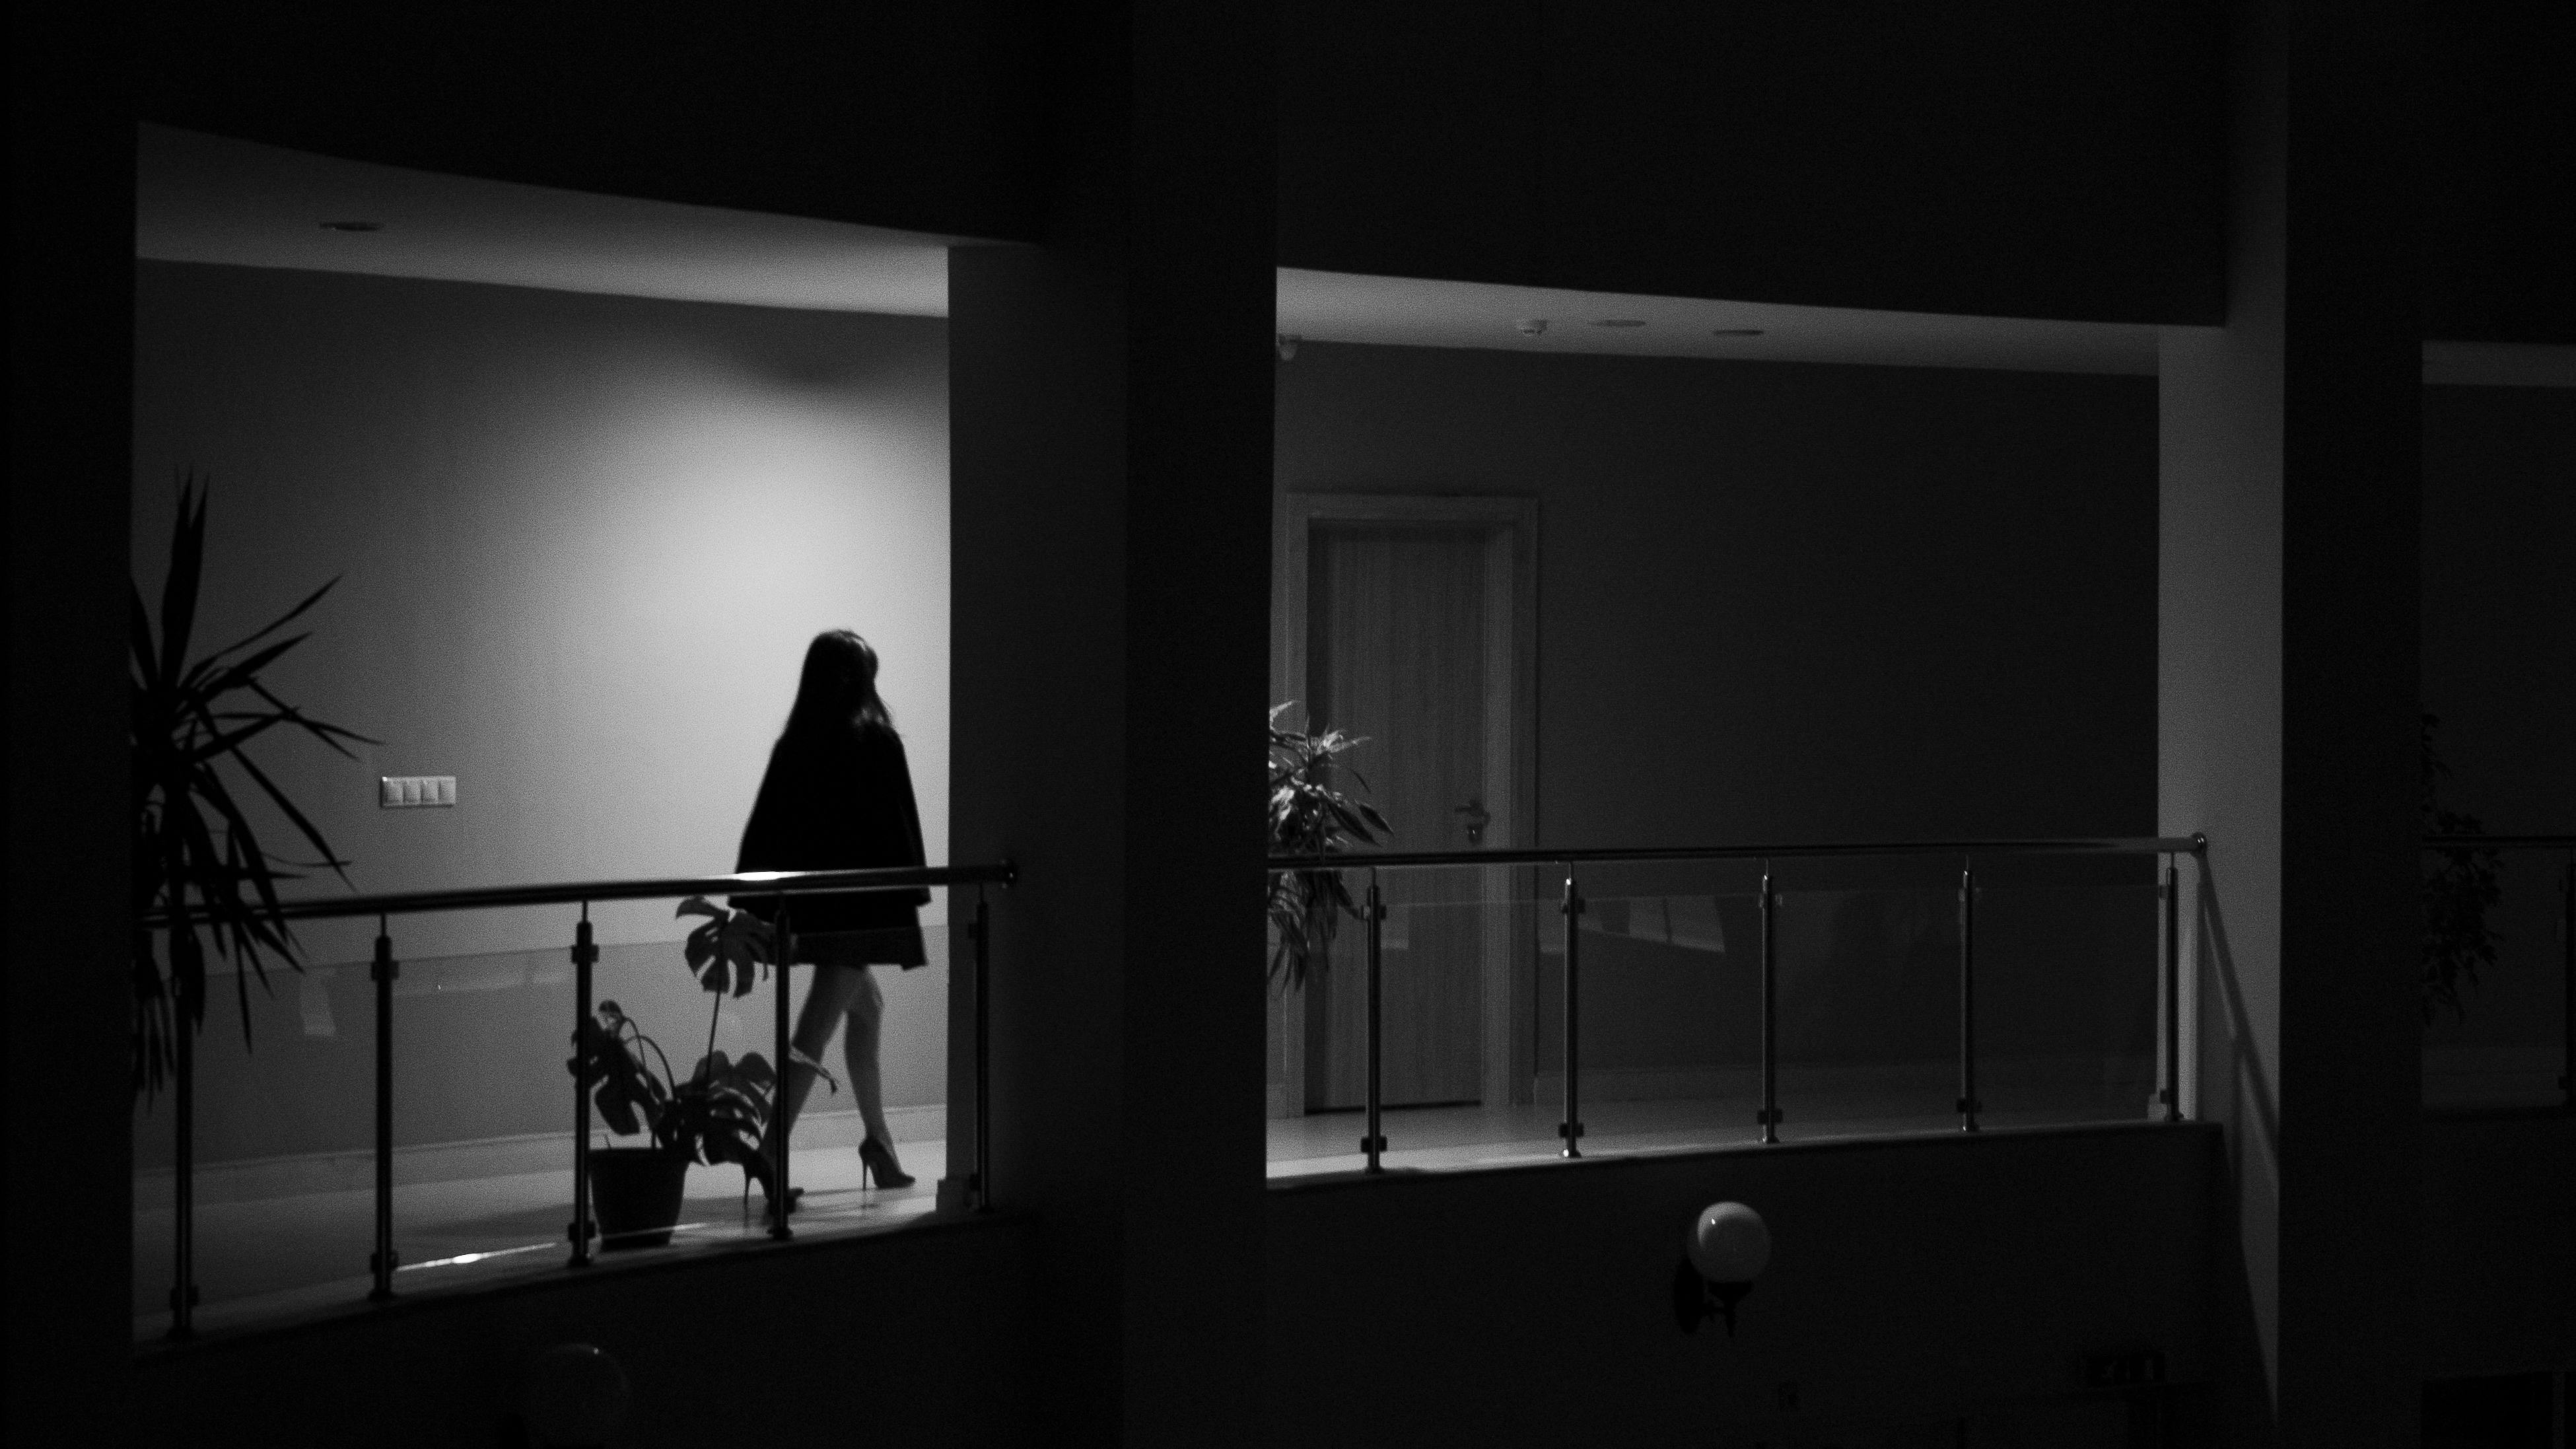 Black and white photo of a woman walking on the balcony | Source: Pexels